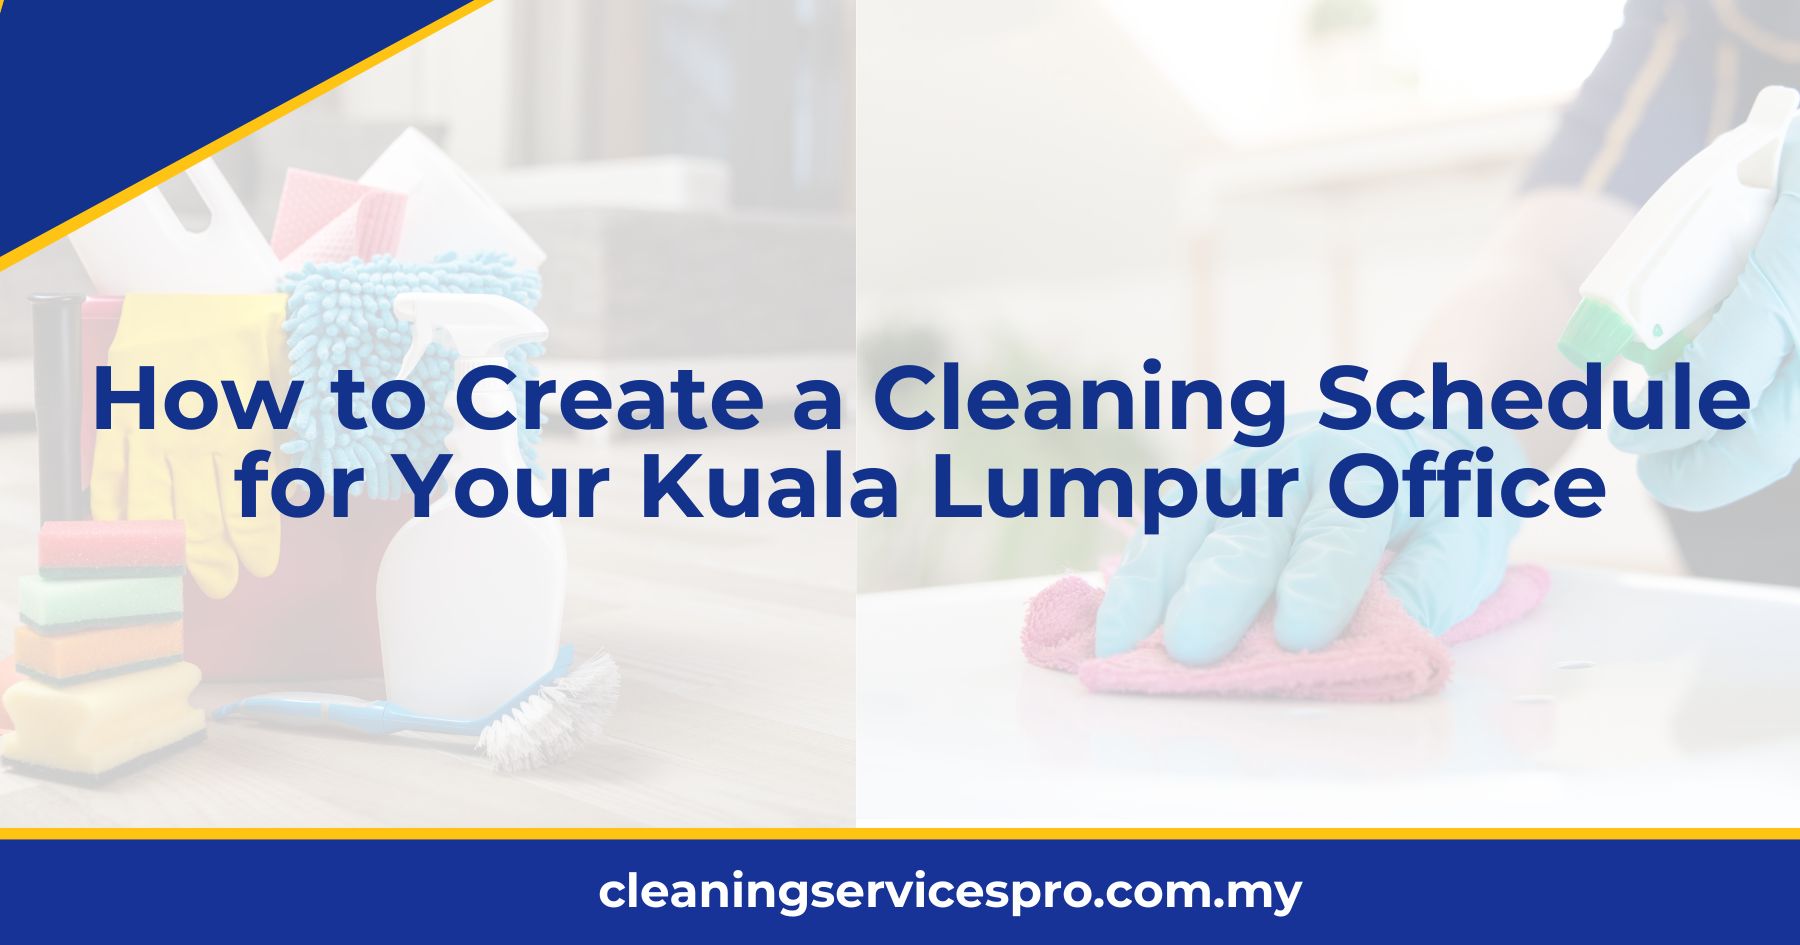 How to Create a Cleaning Schedule for Your Kuala Lumpur Office